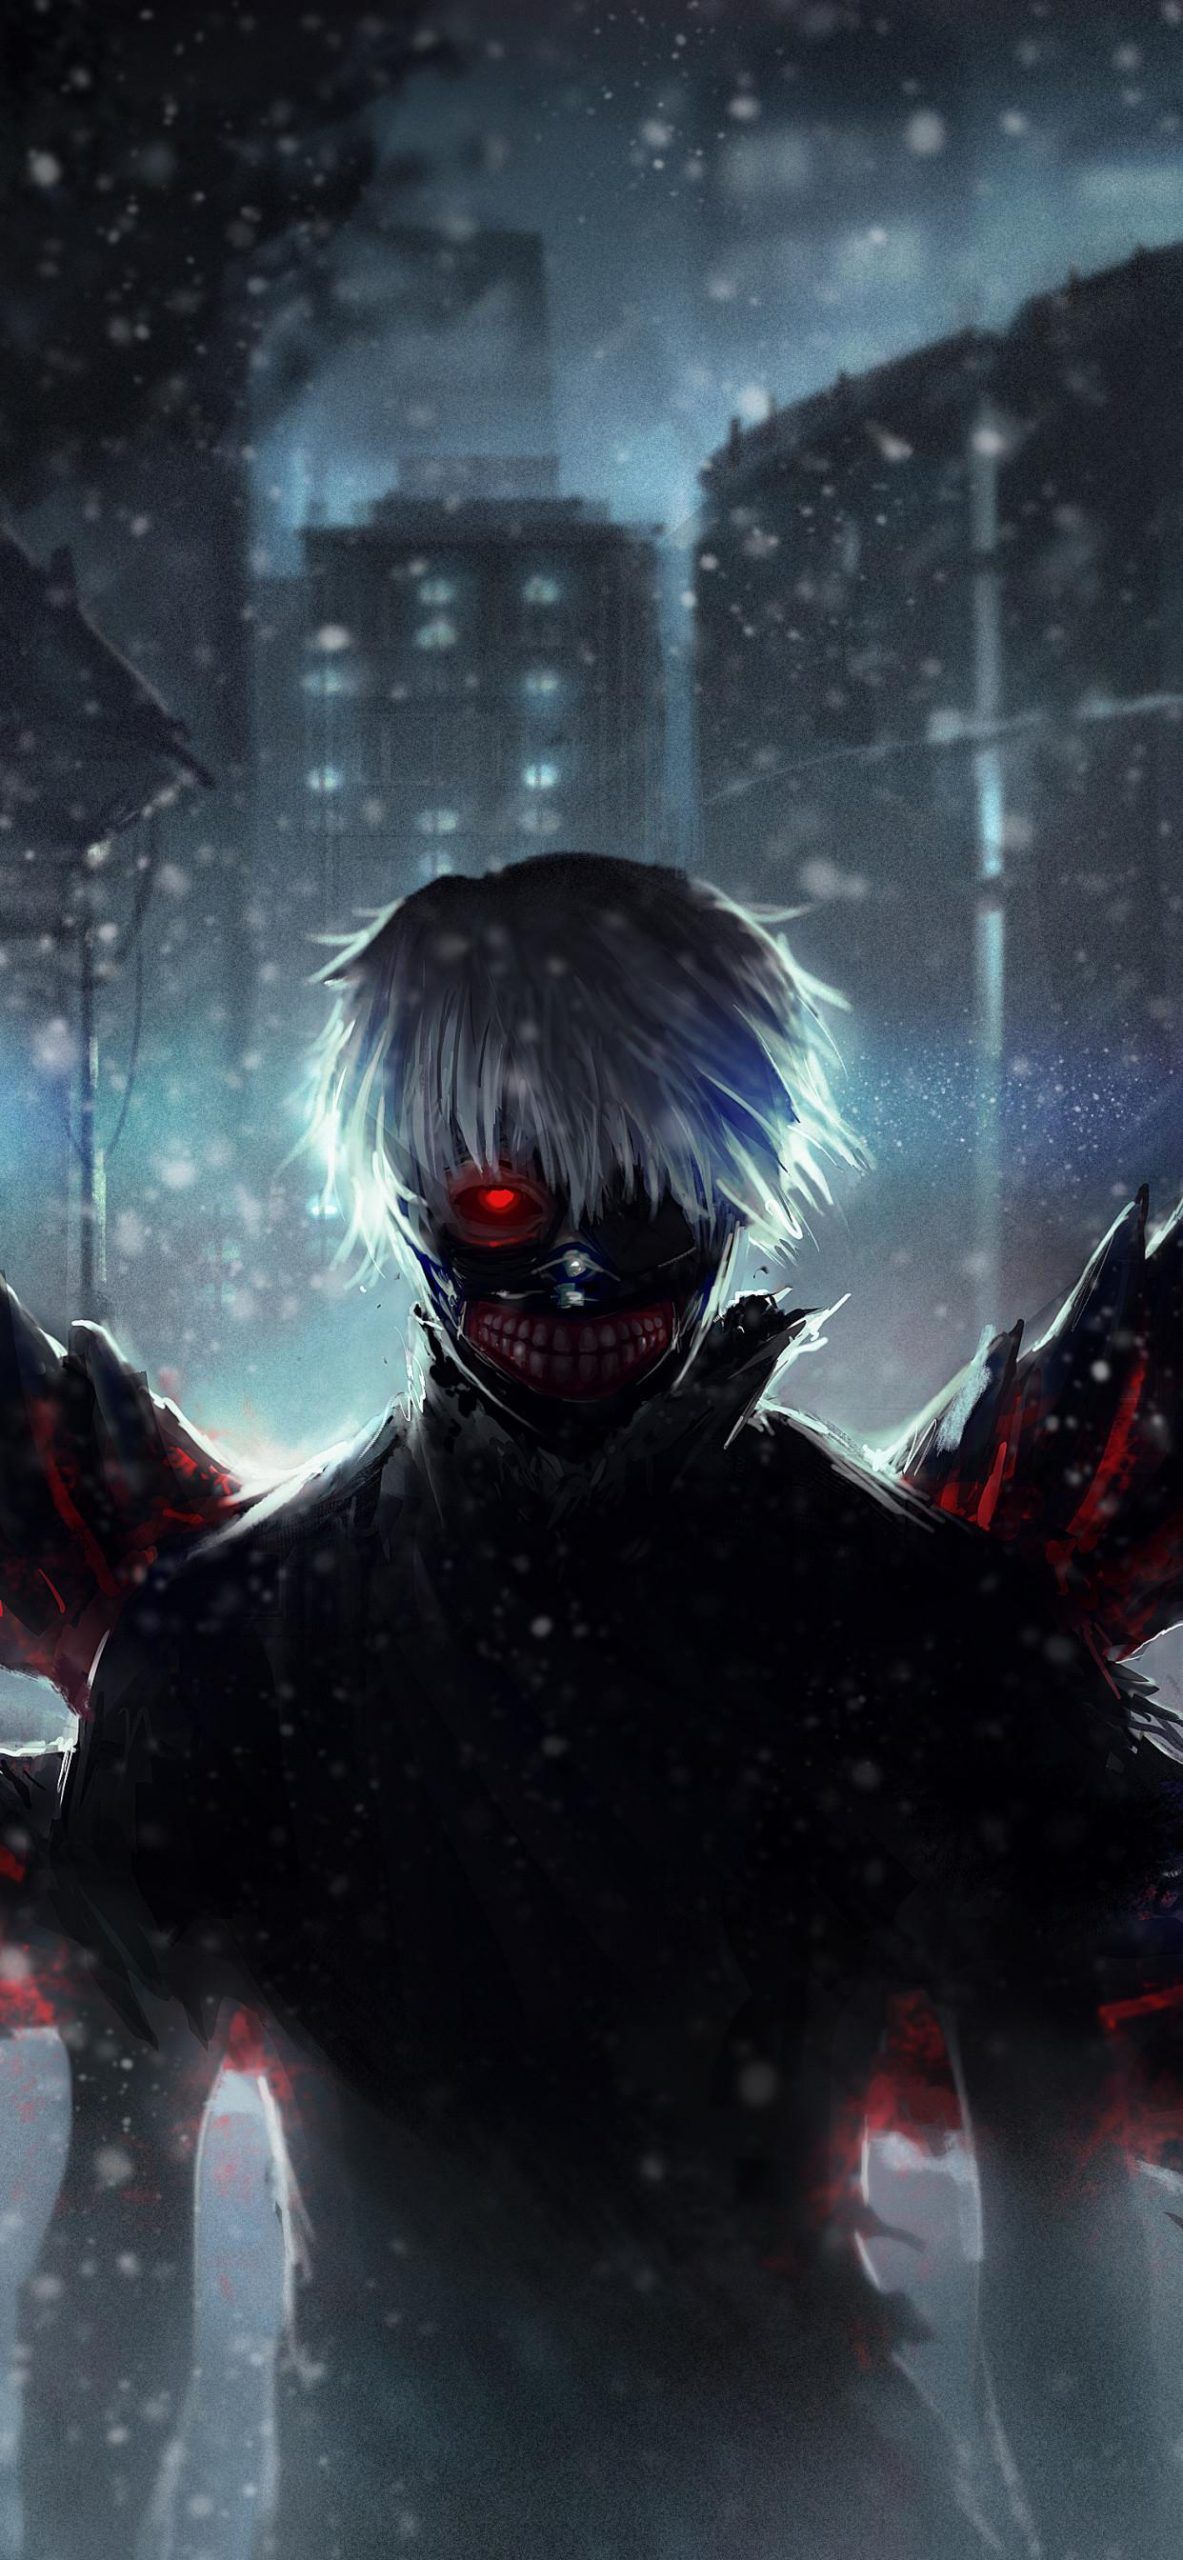 Tokyo Ghoul anime wallpaper for iPhone with high-resolution 1080x1920 pixel. You can use this wallpaper for your iPhone 5, 6, 7, 8, X, XS, XR backgrounds, Mobile Screensaver, or iPad Lock Screen - Anime